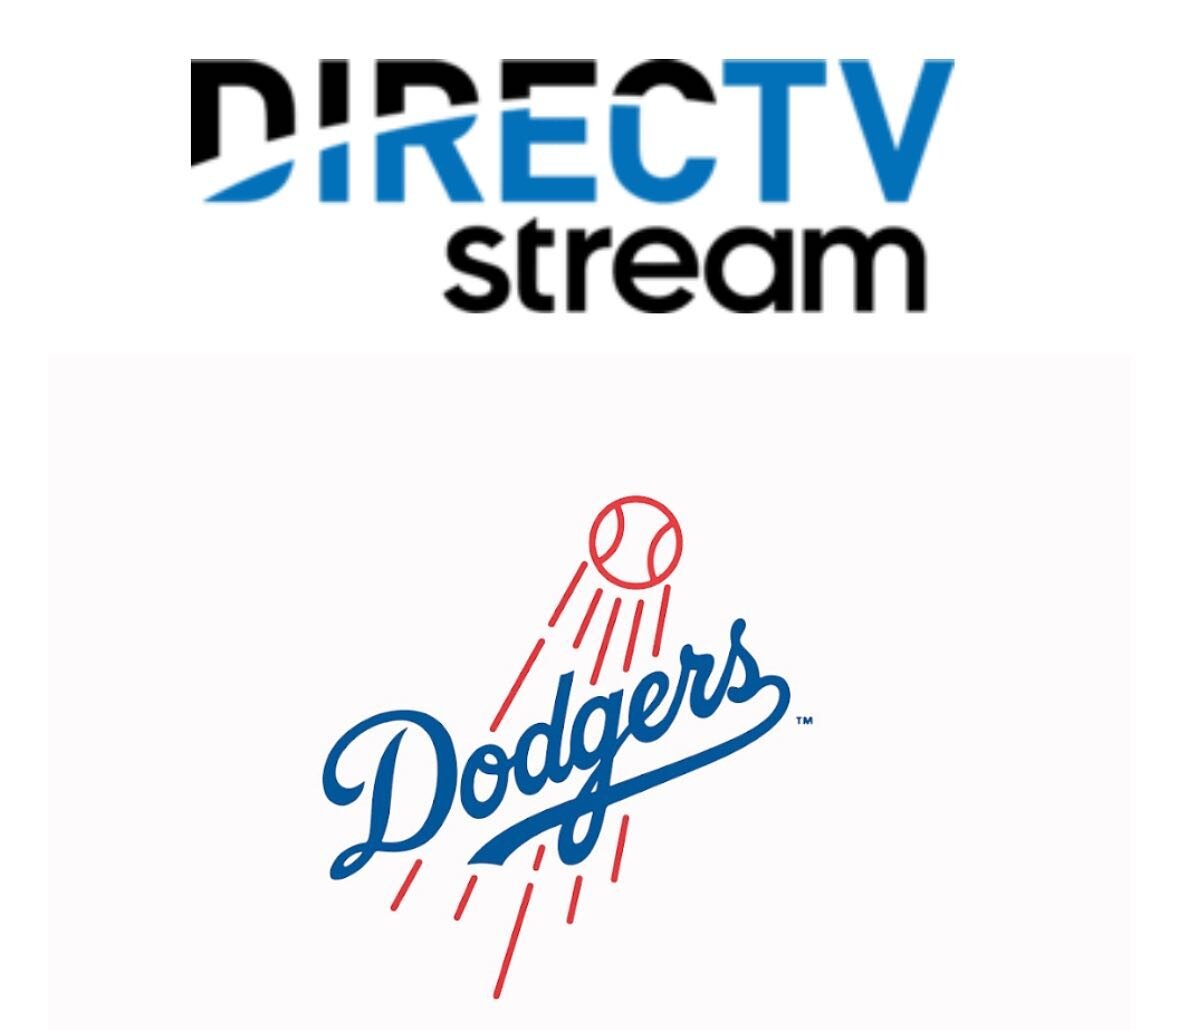 Attention Dodger Fans ⚾️
Never miss a game again with DirecTV Stream! Call us at 805-682-2505 to get set up today!